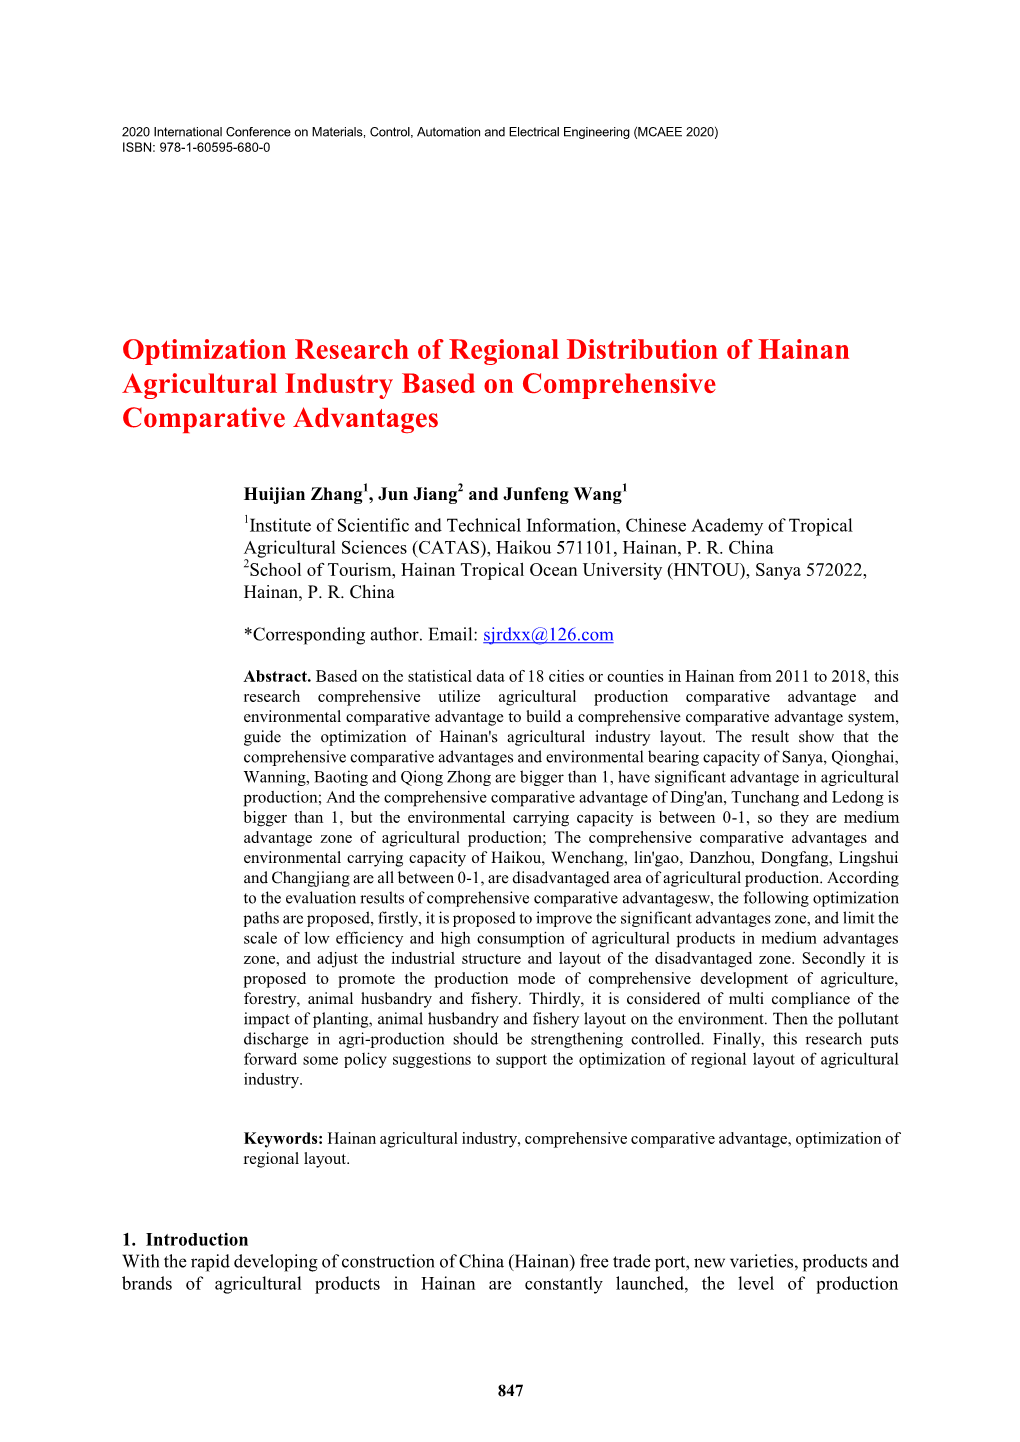 Optimization Research of Regional Distribution of Hainan Agricultural Industry Based on Comprehensive Comparative Advantages